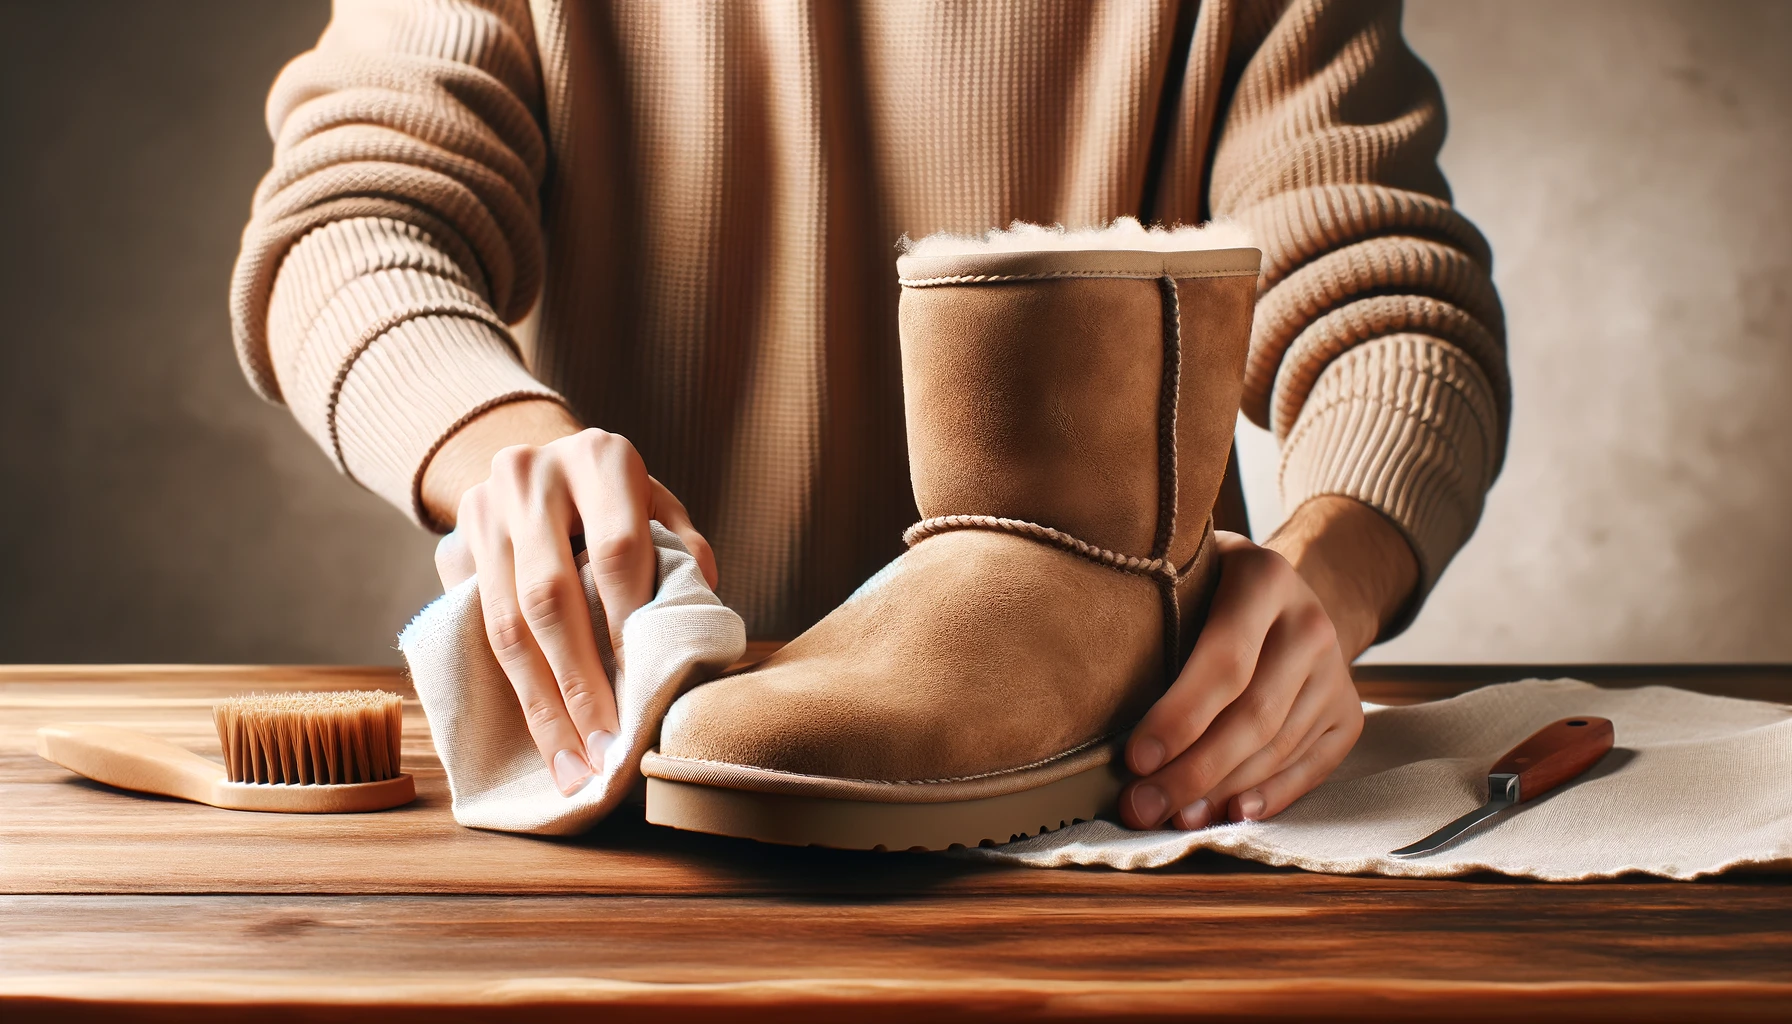 A person's hands are using a white cloth to wipe down a tan Ugg boot on a wooden table.